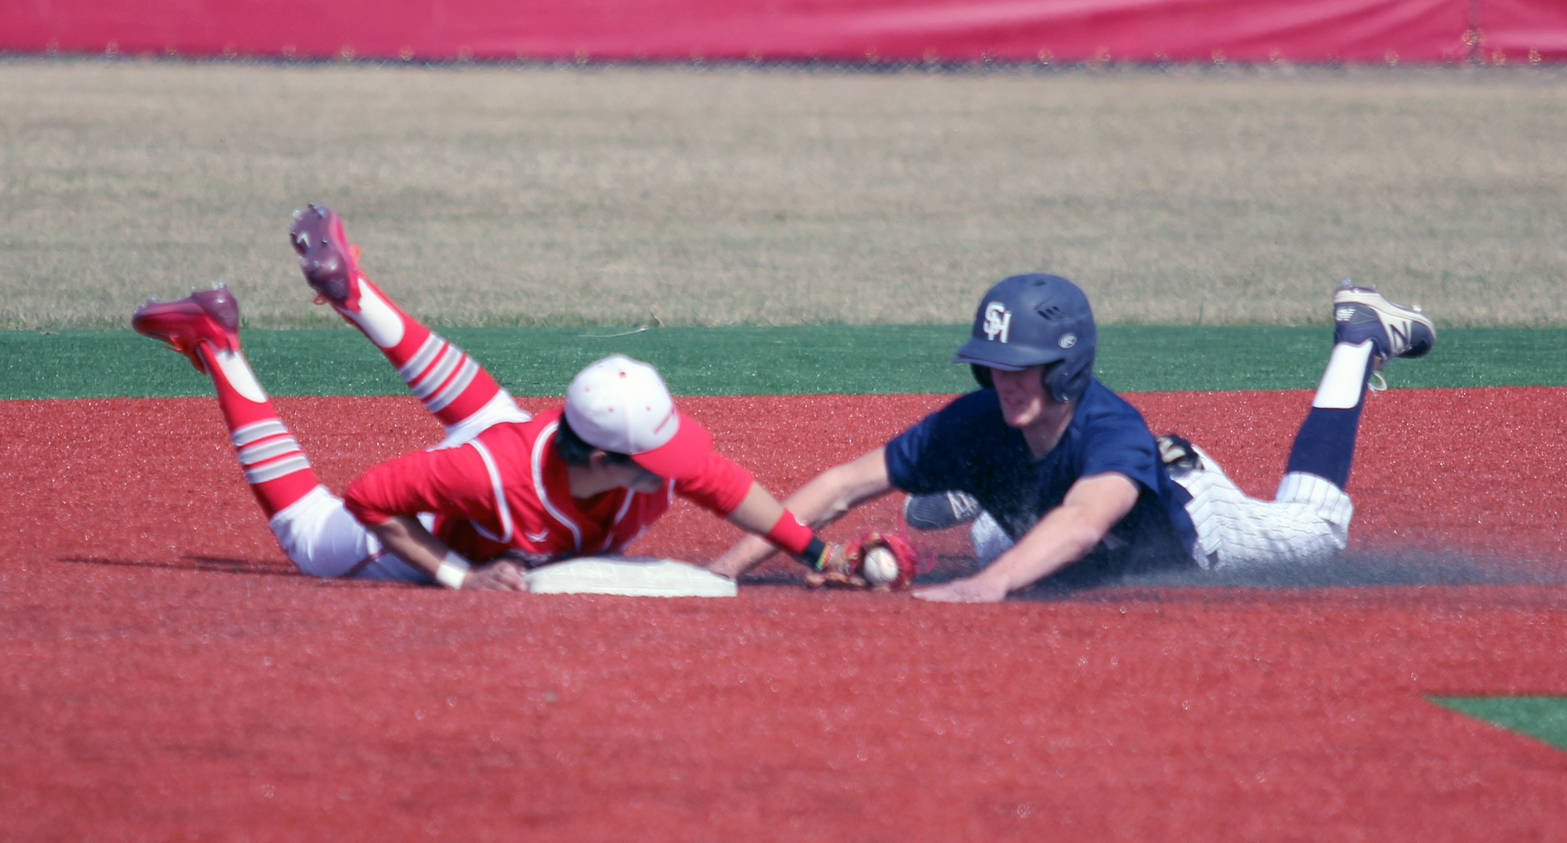 Soldotna’s Cody Quelland slides into second base beating the tag attempt by Wasilla shortstop Balas Buckmaster during Wasilla’s 12-9 win over the Stars on Saturday afternoon at Wasilla High School. (Photo by Jeff Helminiak/Peninsula Clarion)